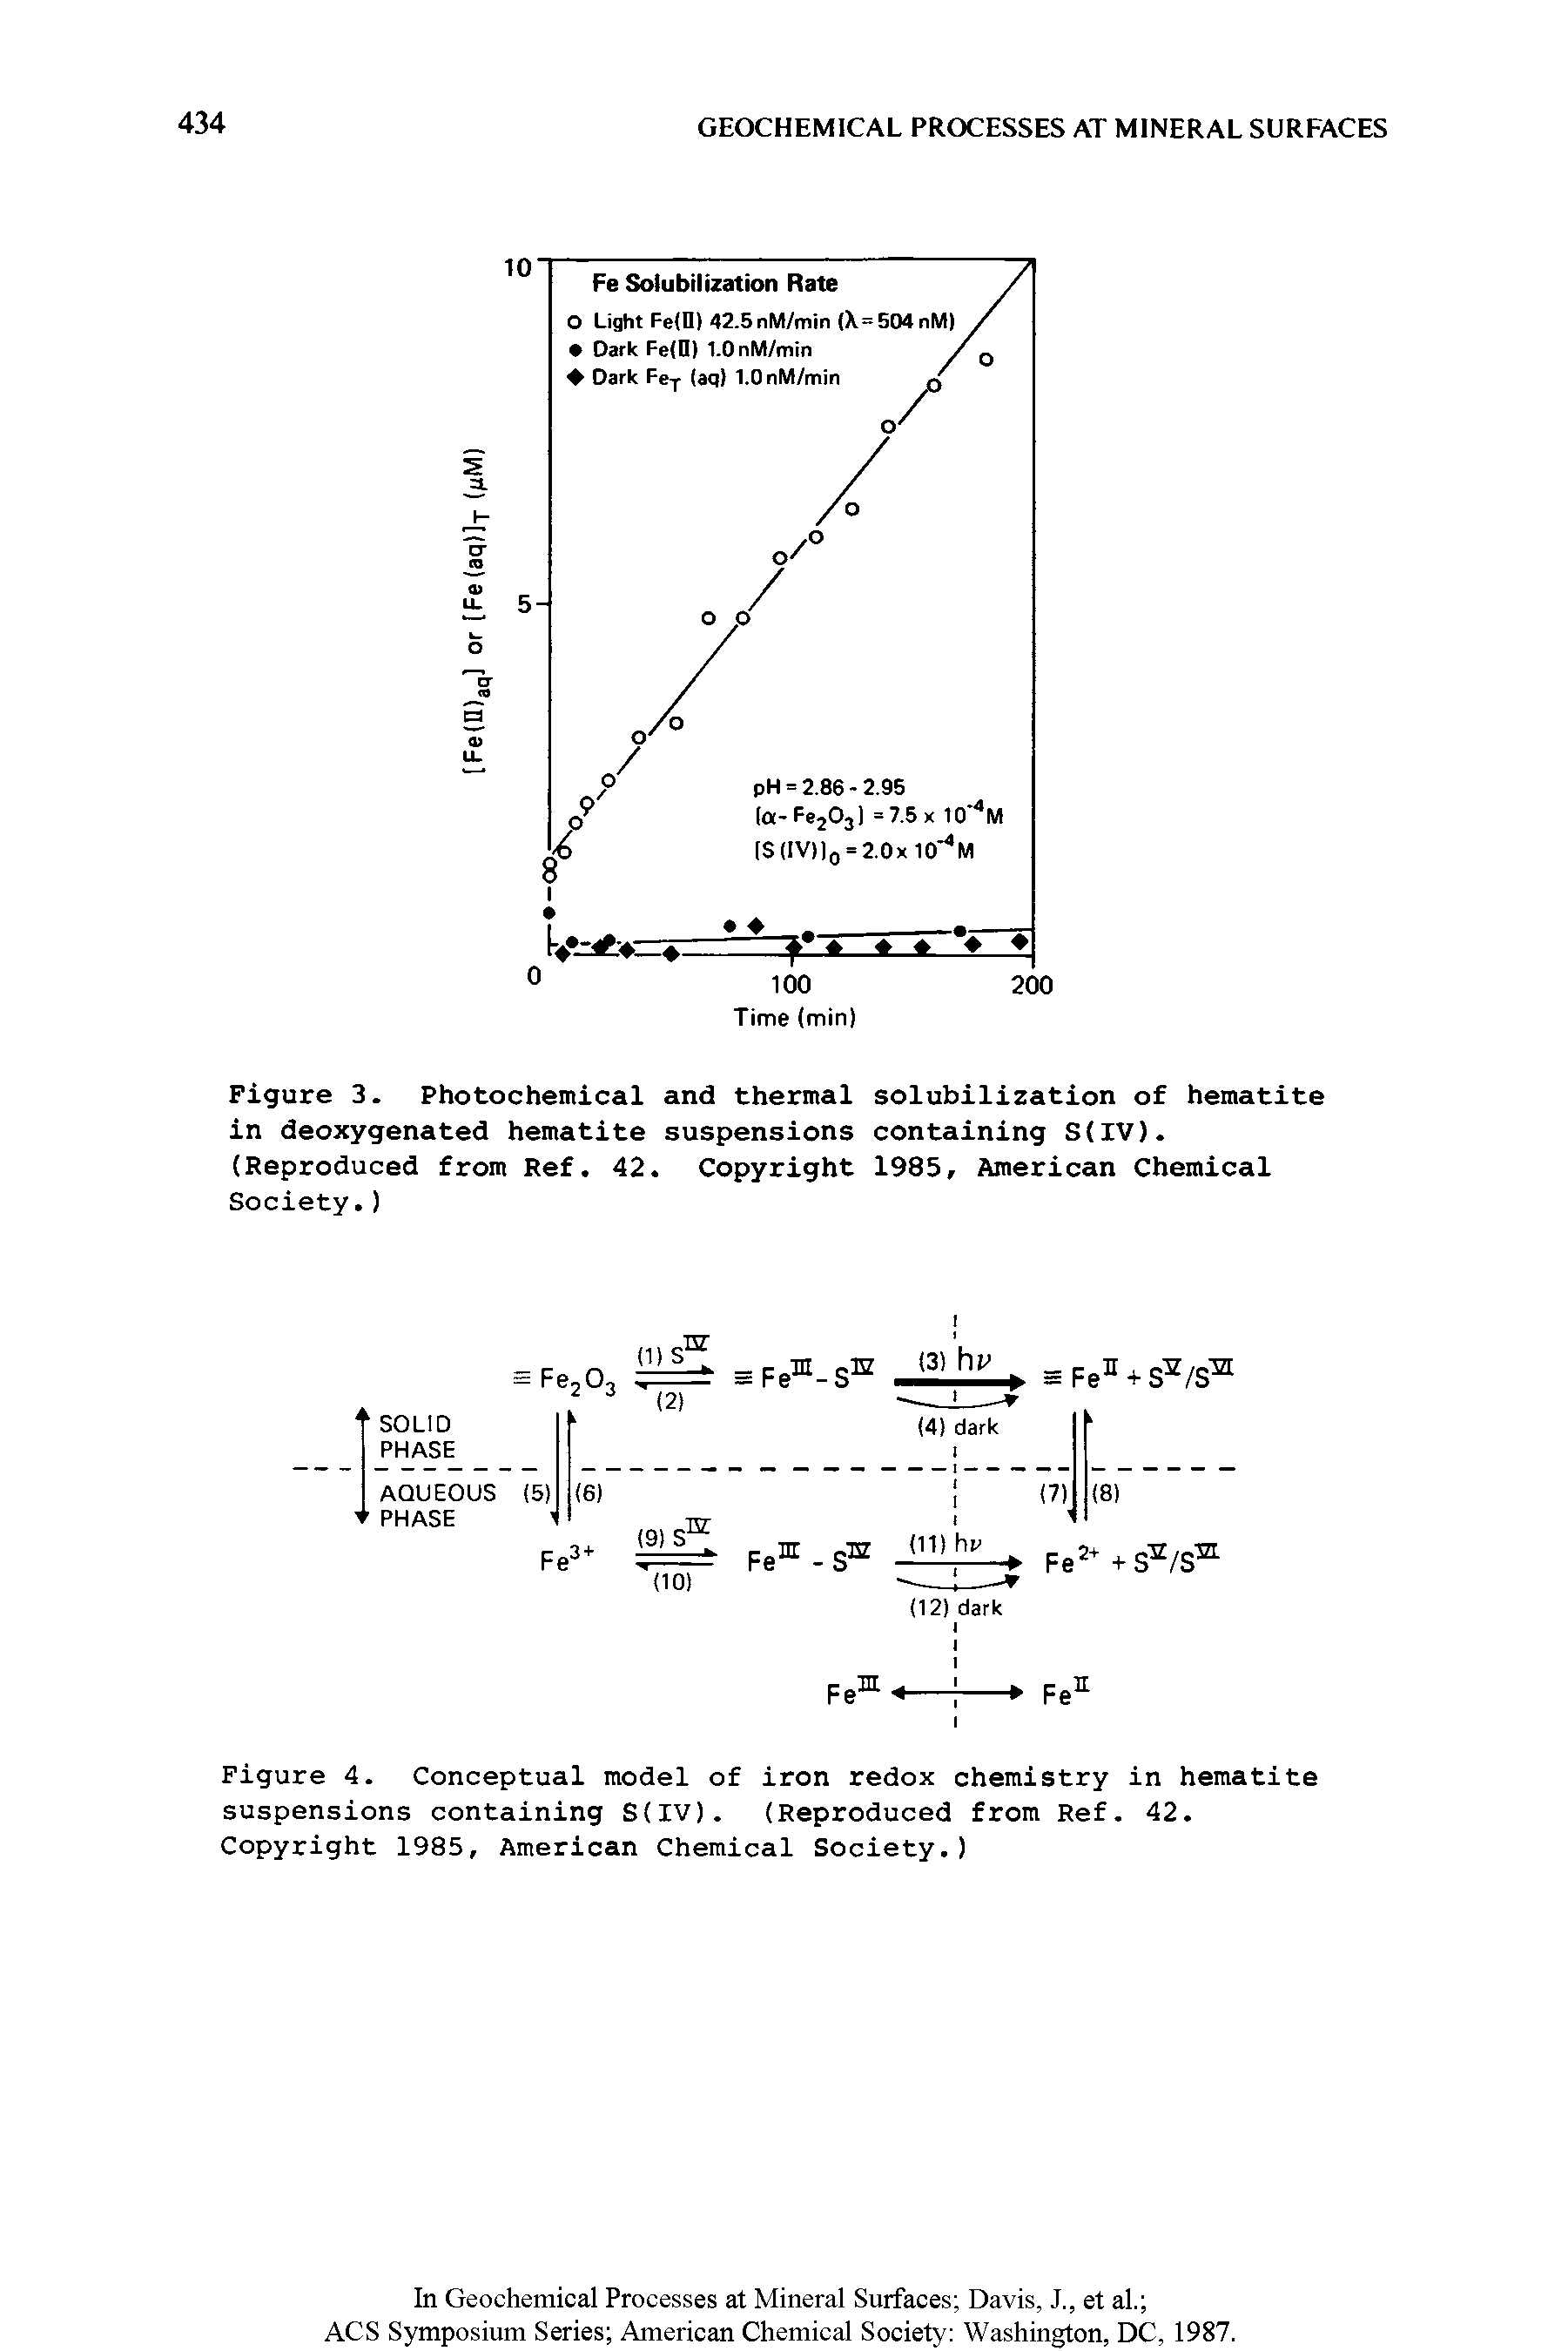 Figure 4. Conceptual model of iron redox chemistry in hematite suspensions containing S(IV). (Reproduced from Ref. 42. Copyright 1985, American Chemical Society.)...